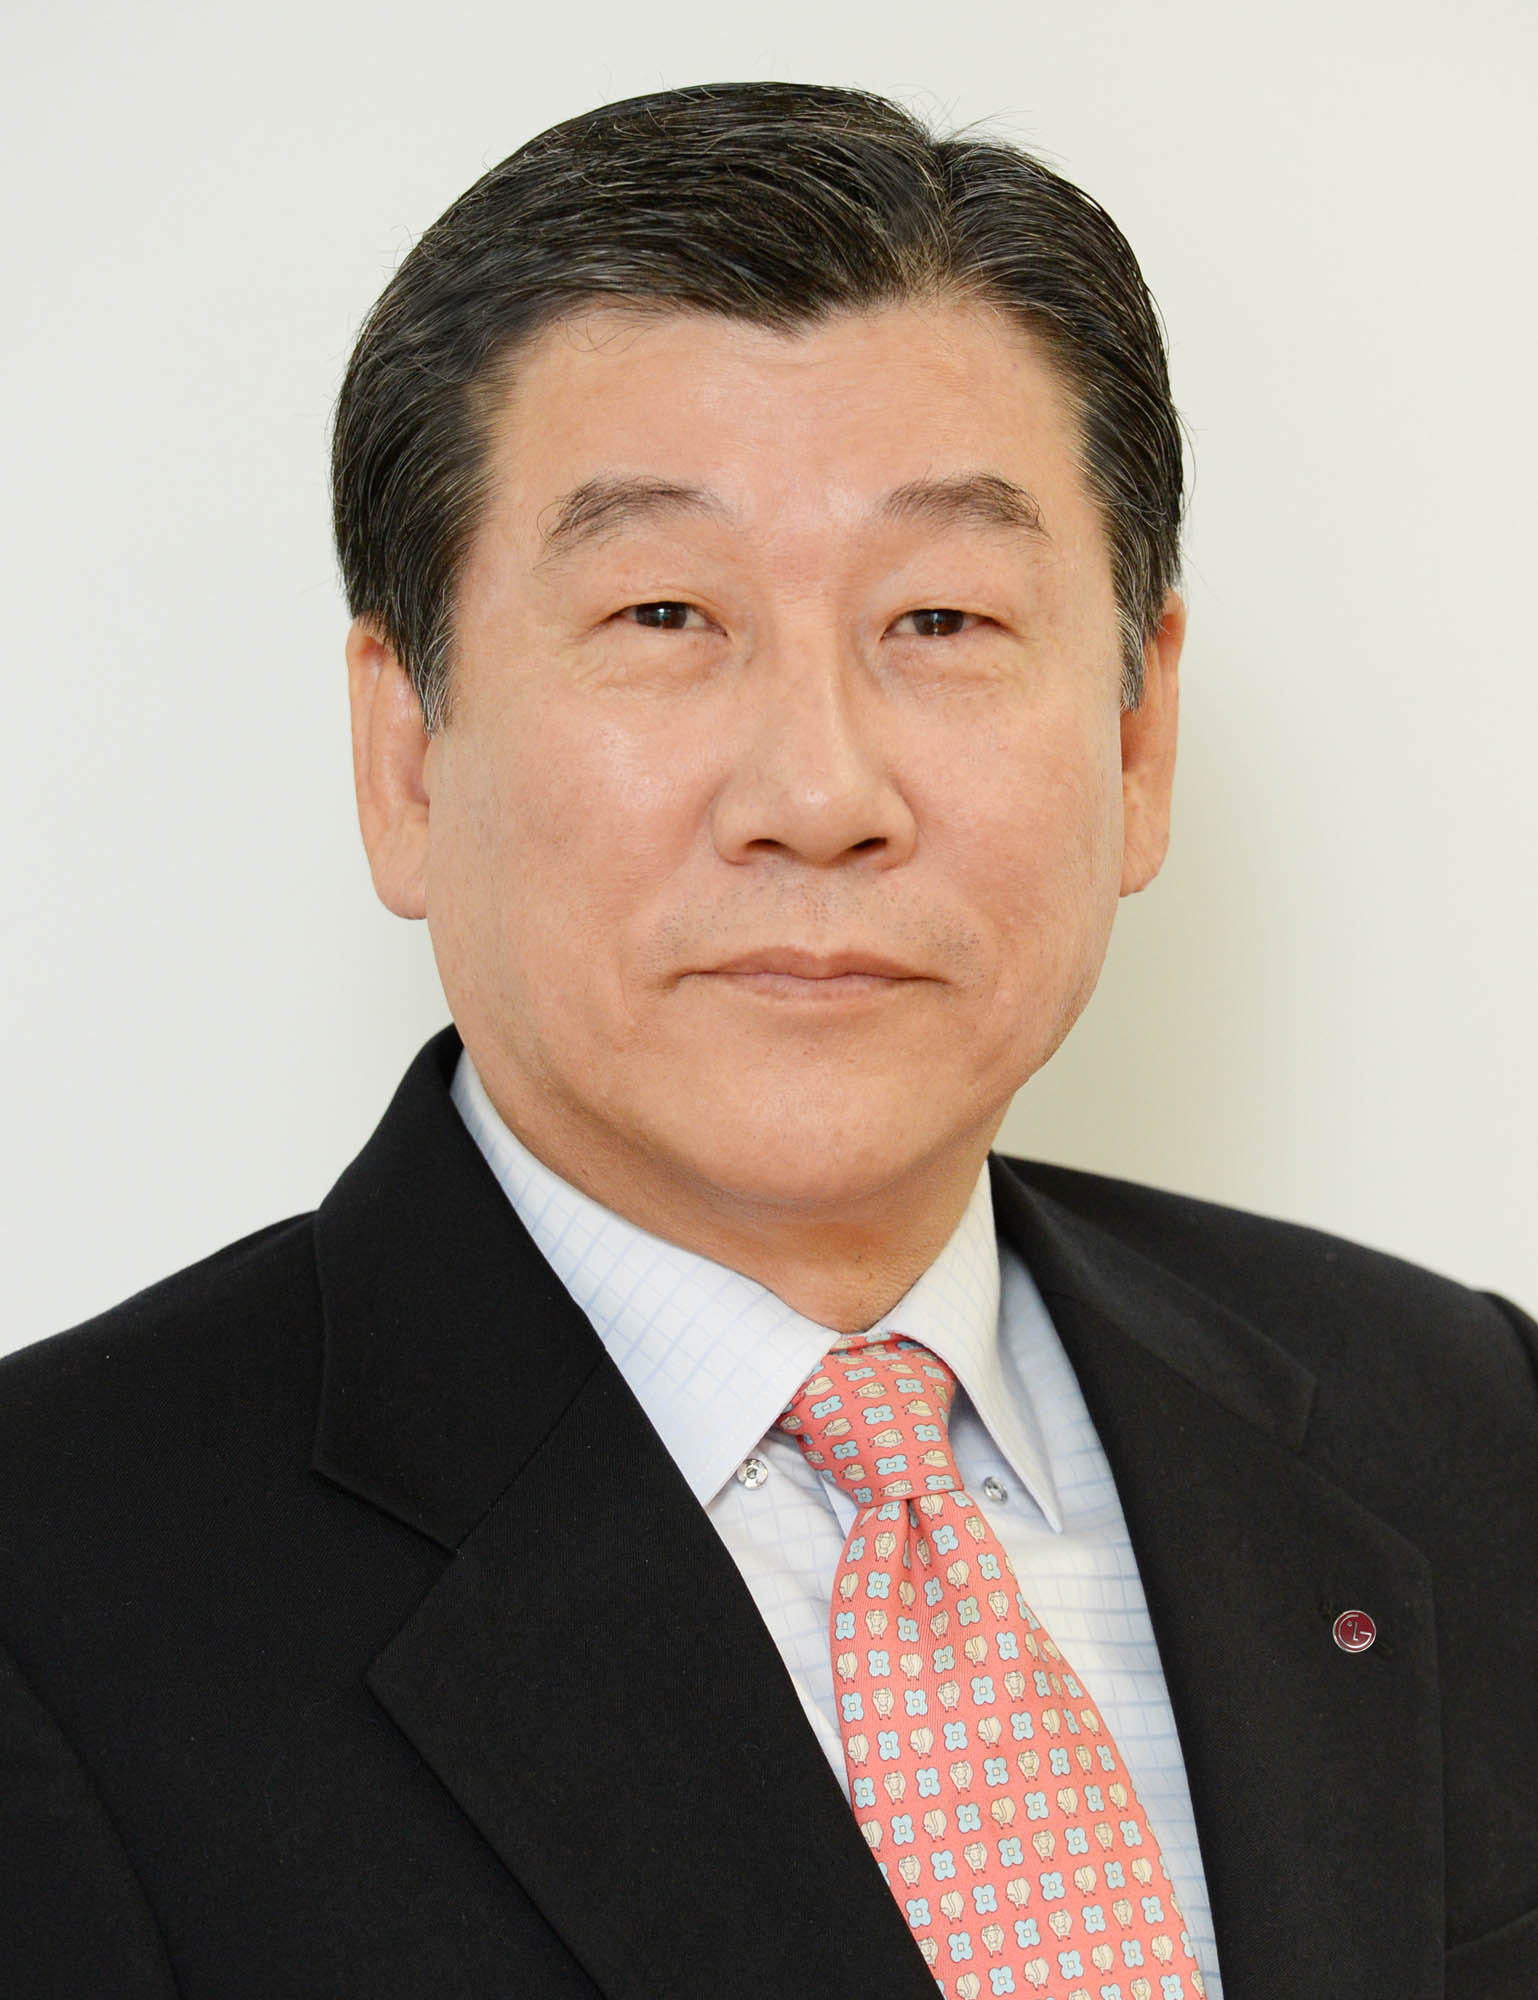 A headshot of David Jung, president and chief financial officer of LG